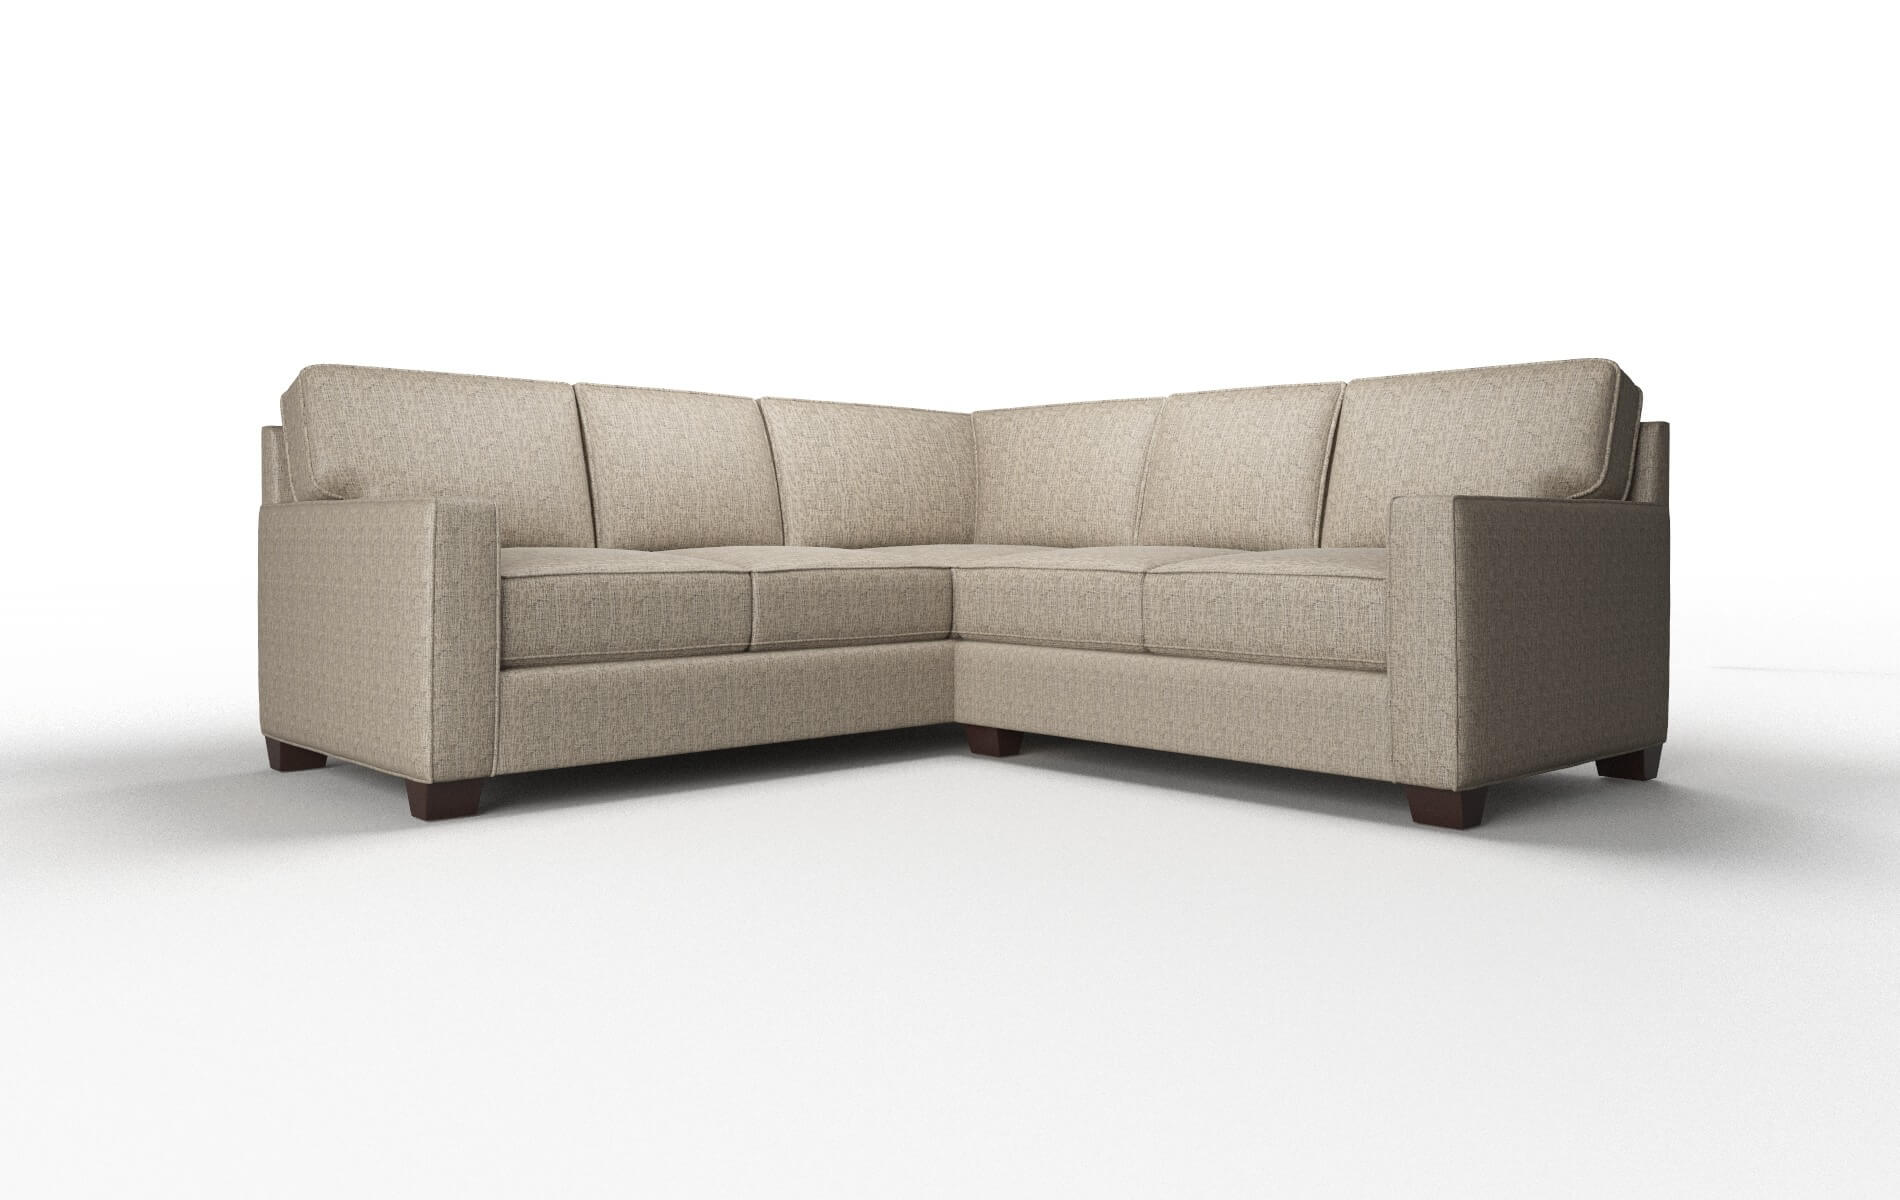 Chicago Solifestyle 51 Sectional espresso legs 1